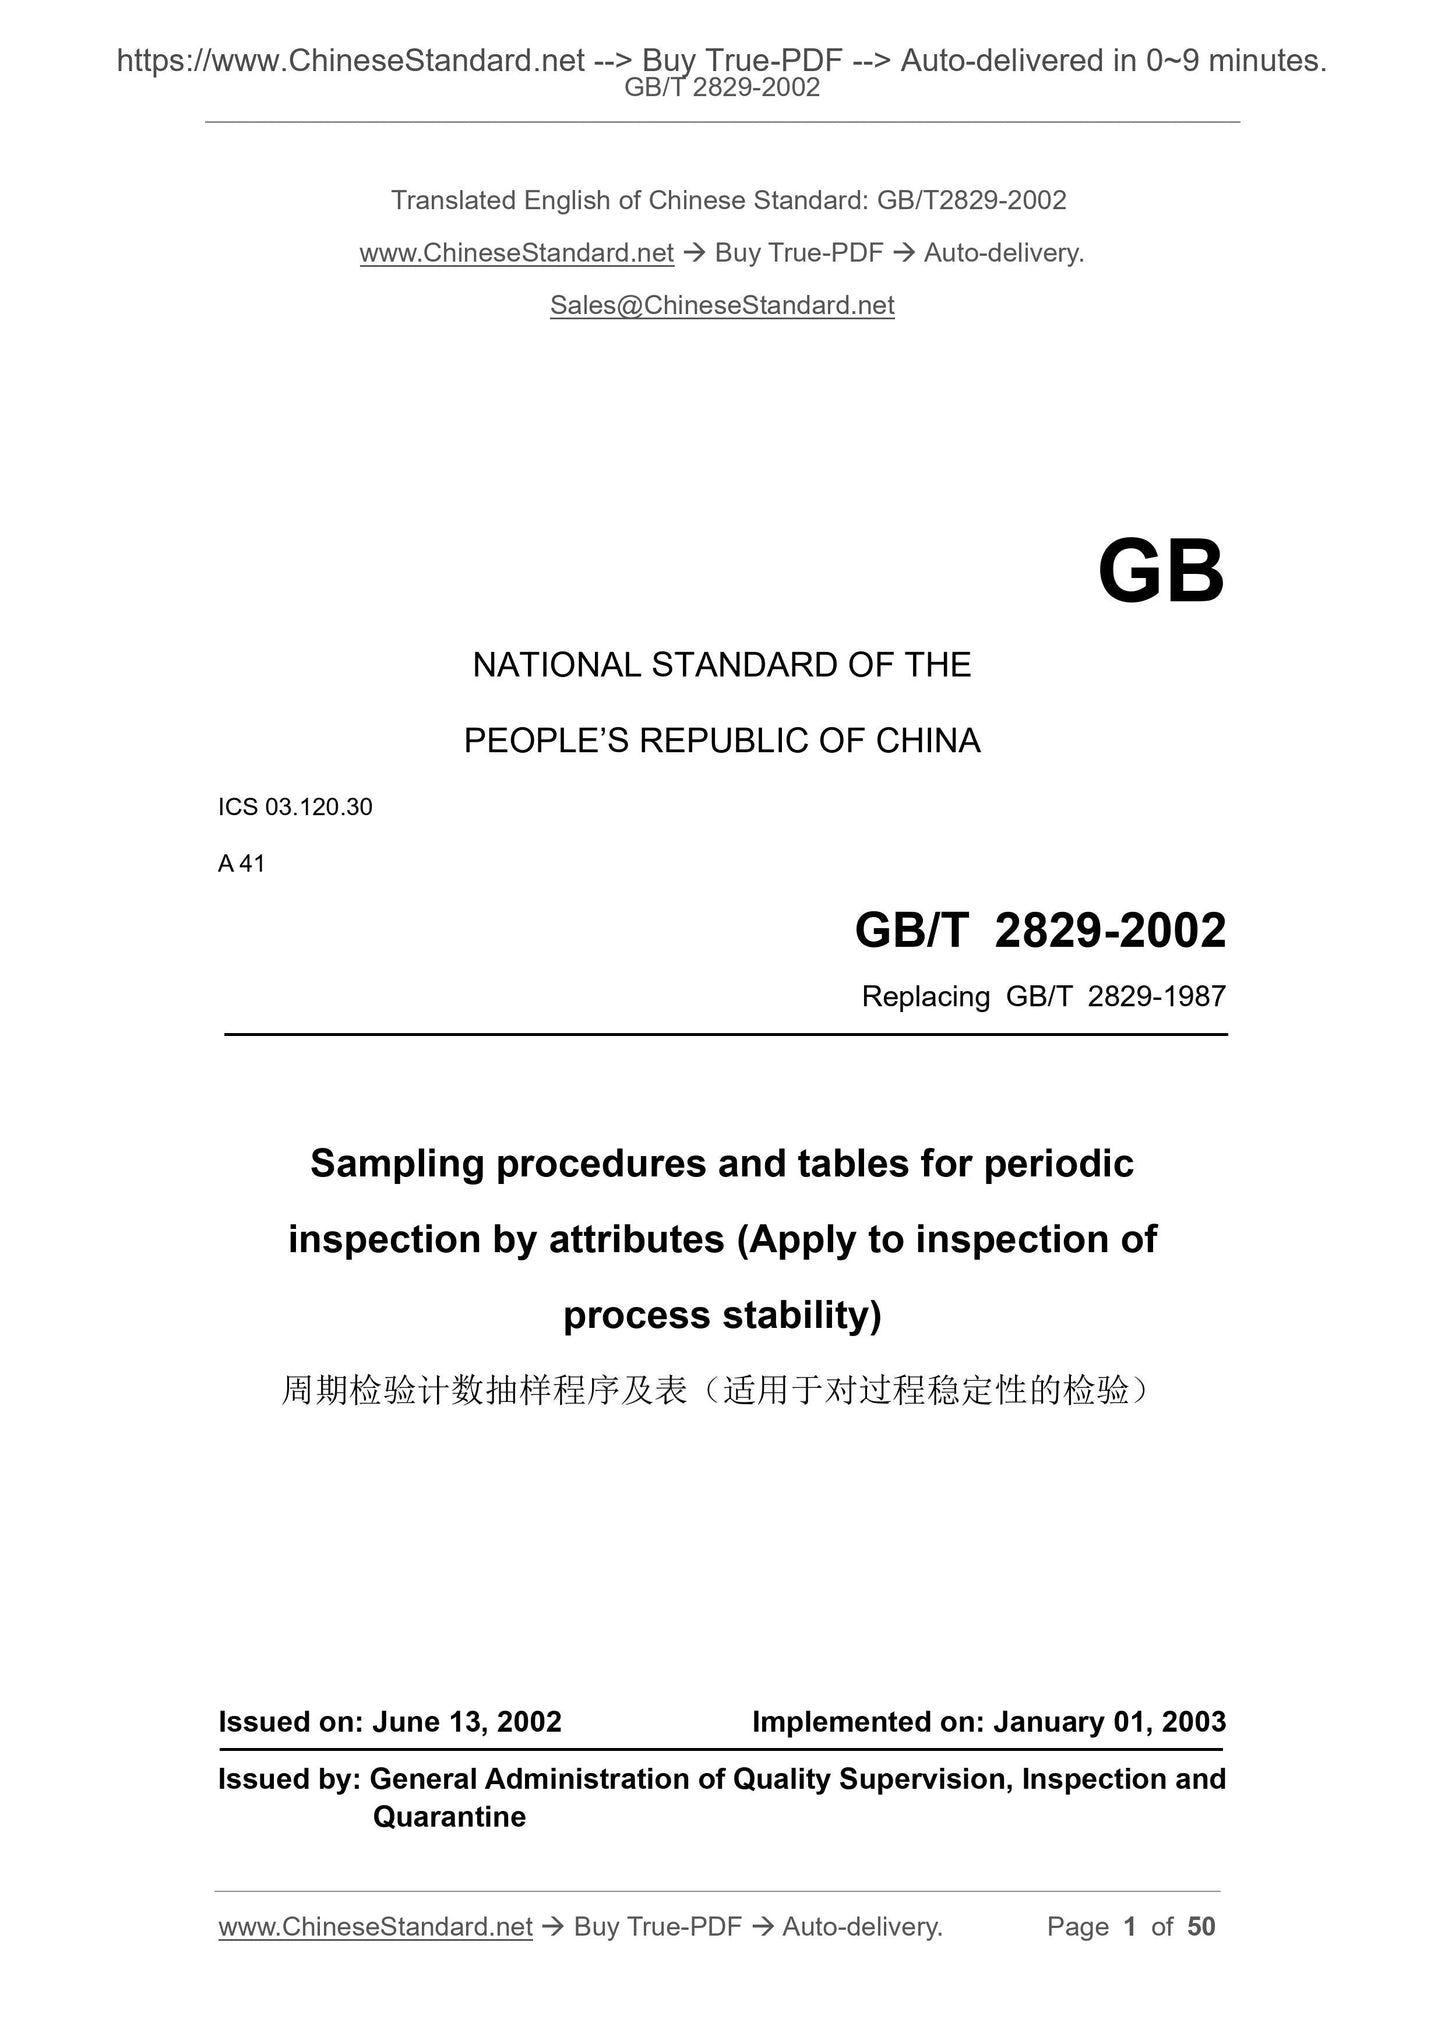 GB/T 2829-2002 Page 1